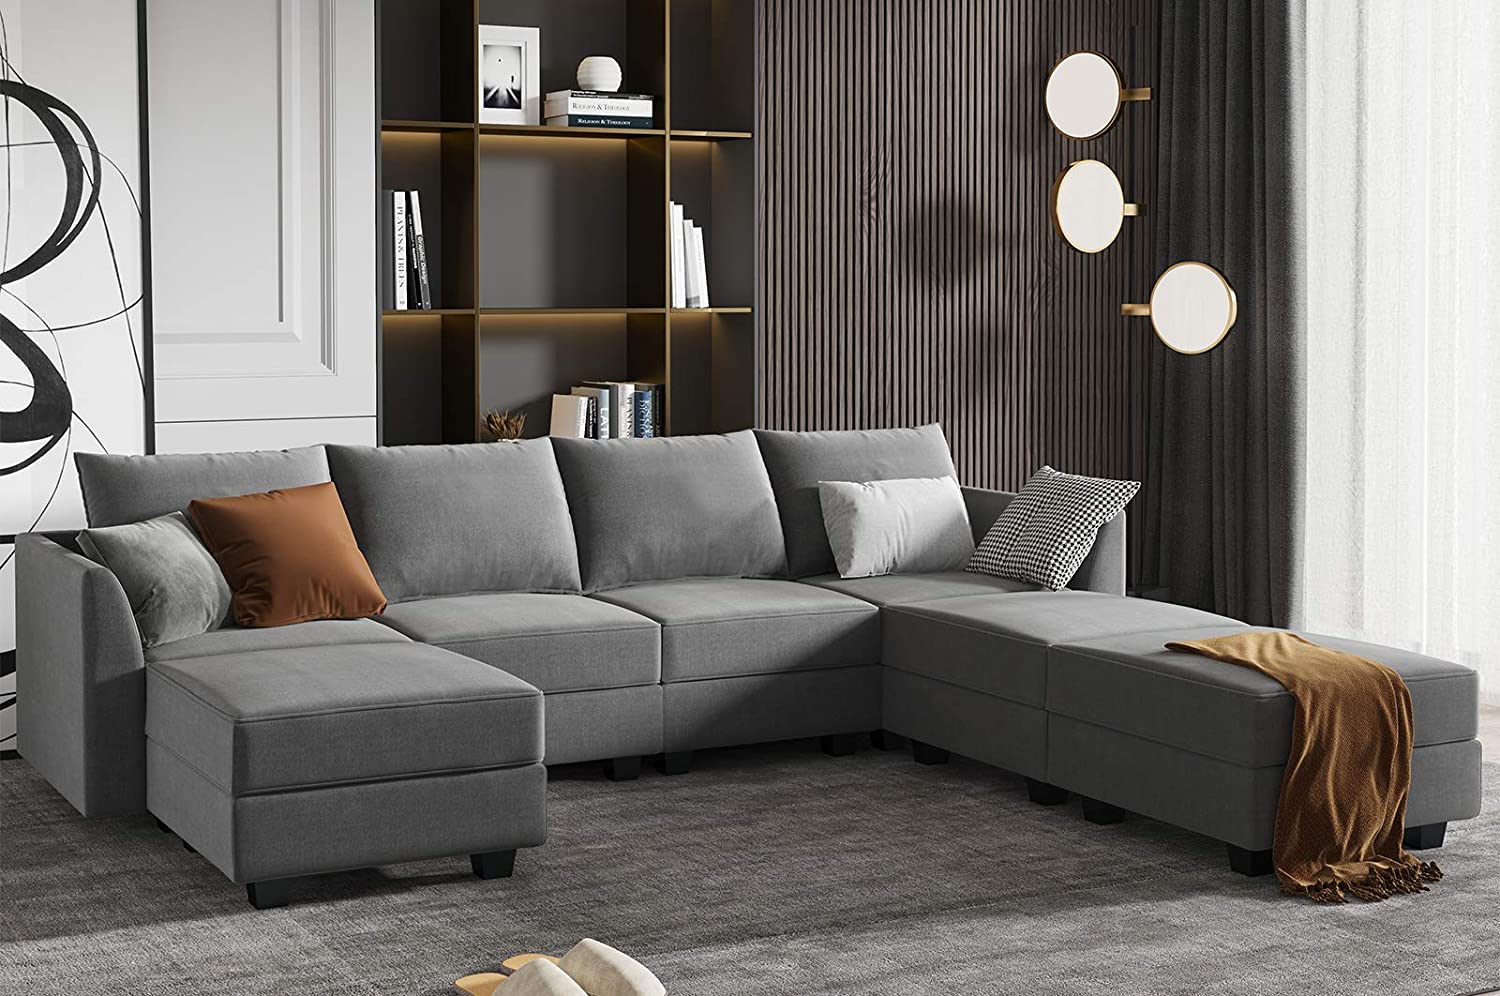 The 15 Best Sectional Sofa Picks for Modern Living Spaces